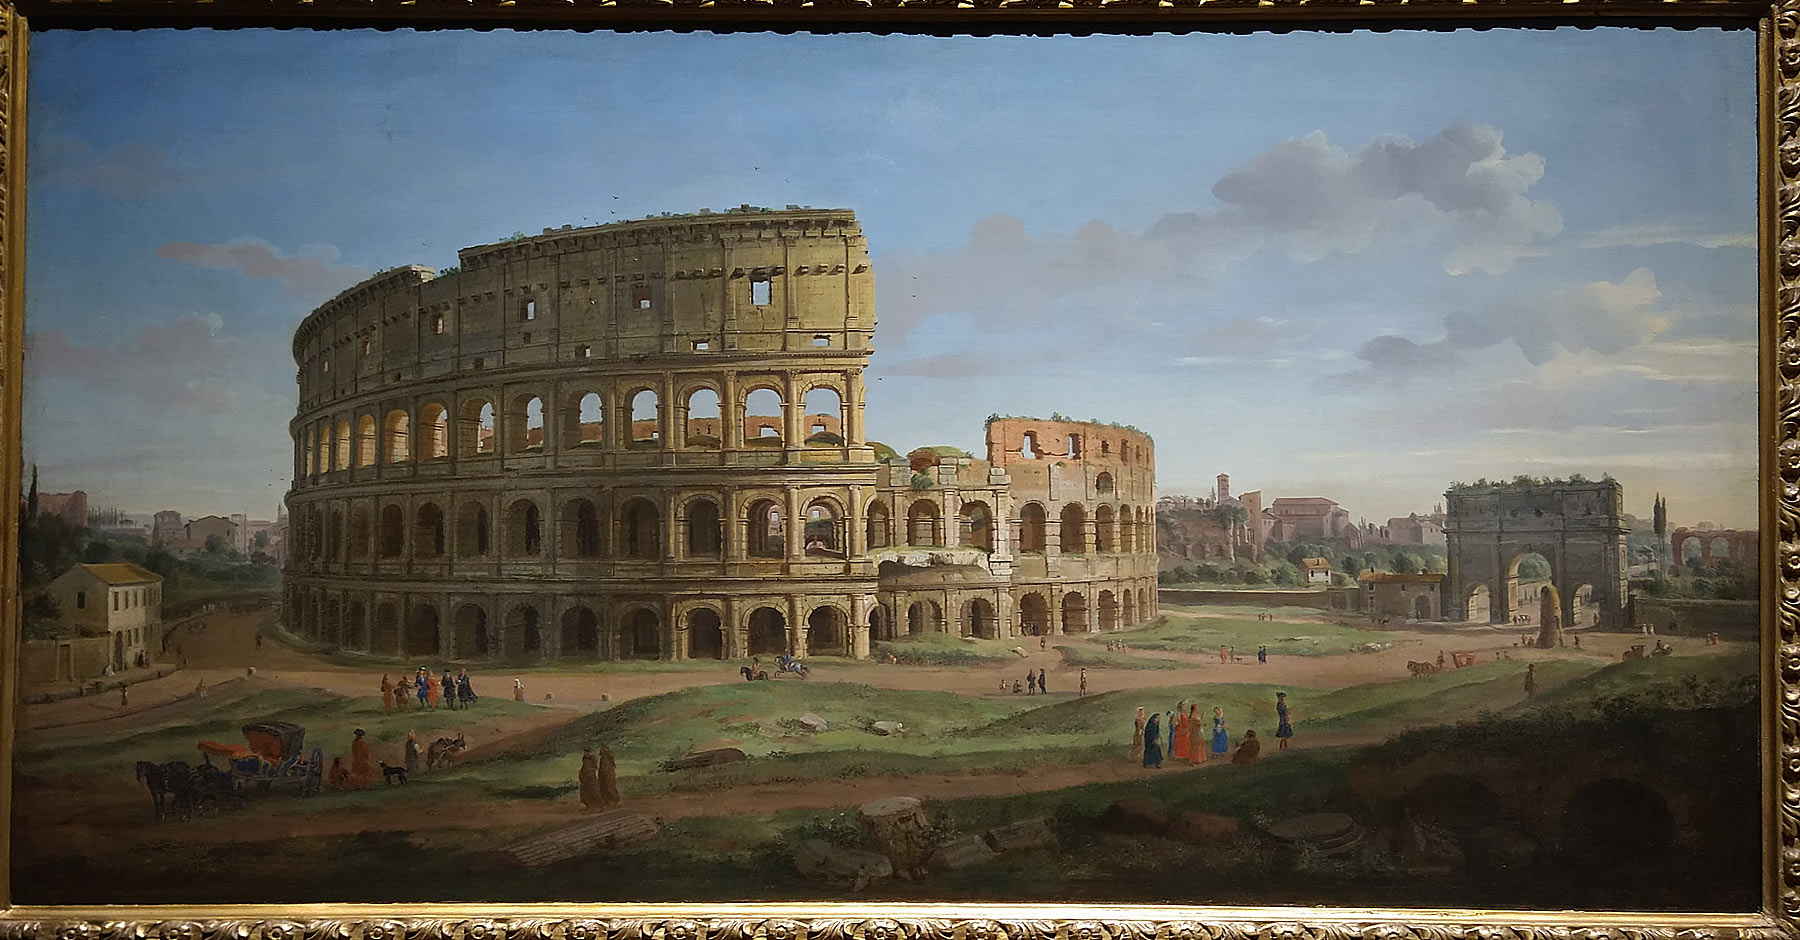 Gaspar van Wittel, Veduta del Colosseo con l'arco di Costantino (1716; olio su tela, 54,5 x 114,3 cm; Norfolk, The Earl of Leicester and the Trustees of the Holkham Estate) 